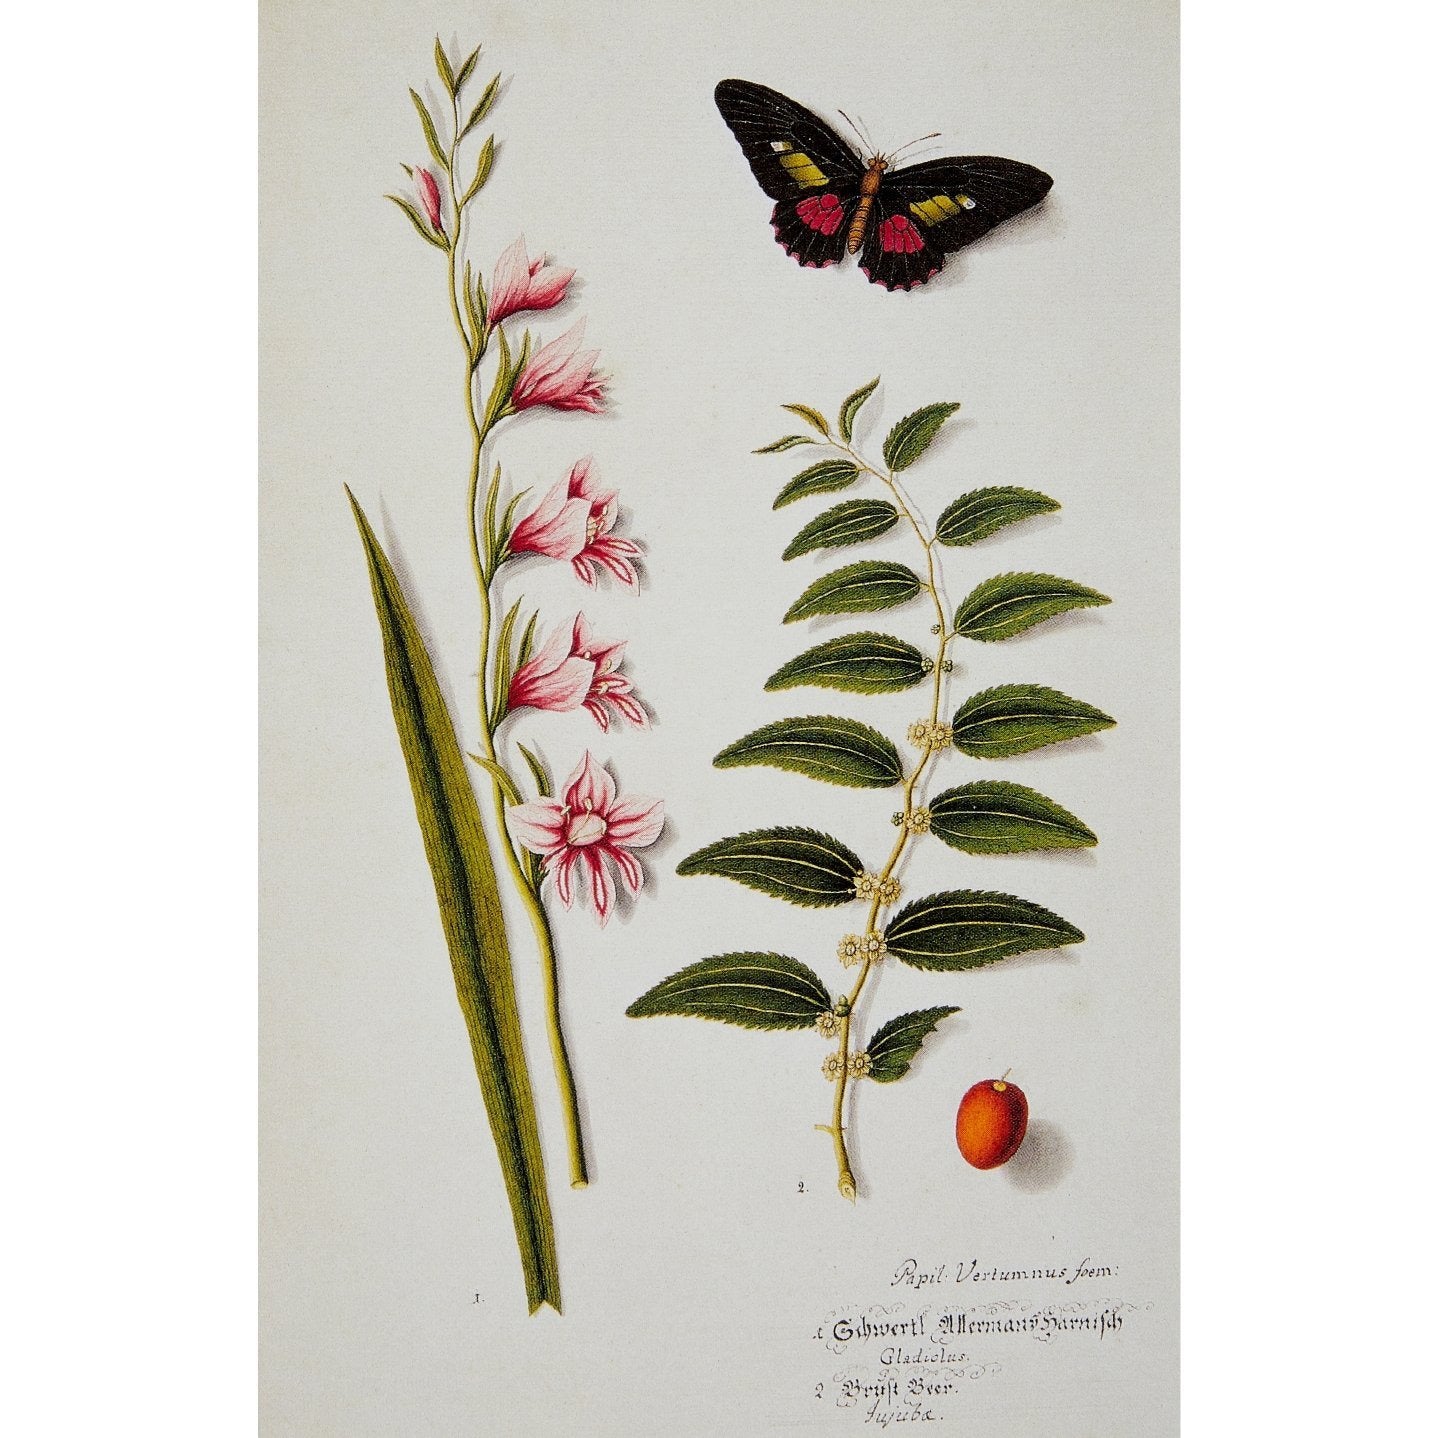 Notecard image - Joseph Jakob von Plenck, Gladiolus, jujube and butterfly. From the Broughton collection in the Fitzwilliam Museum, brought to you by CuratingCambridge.co.uk